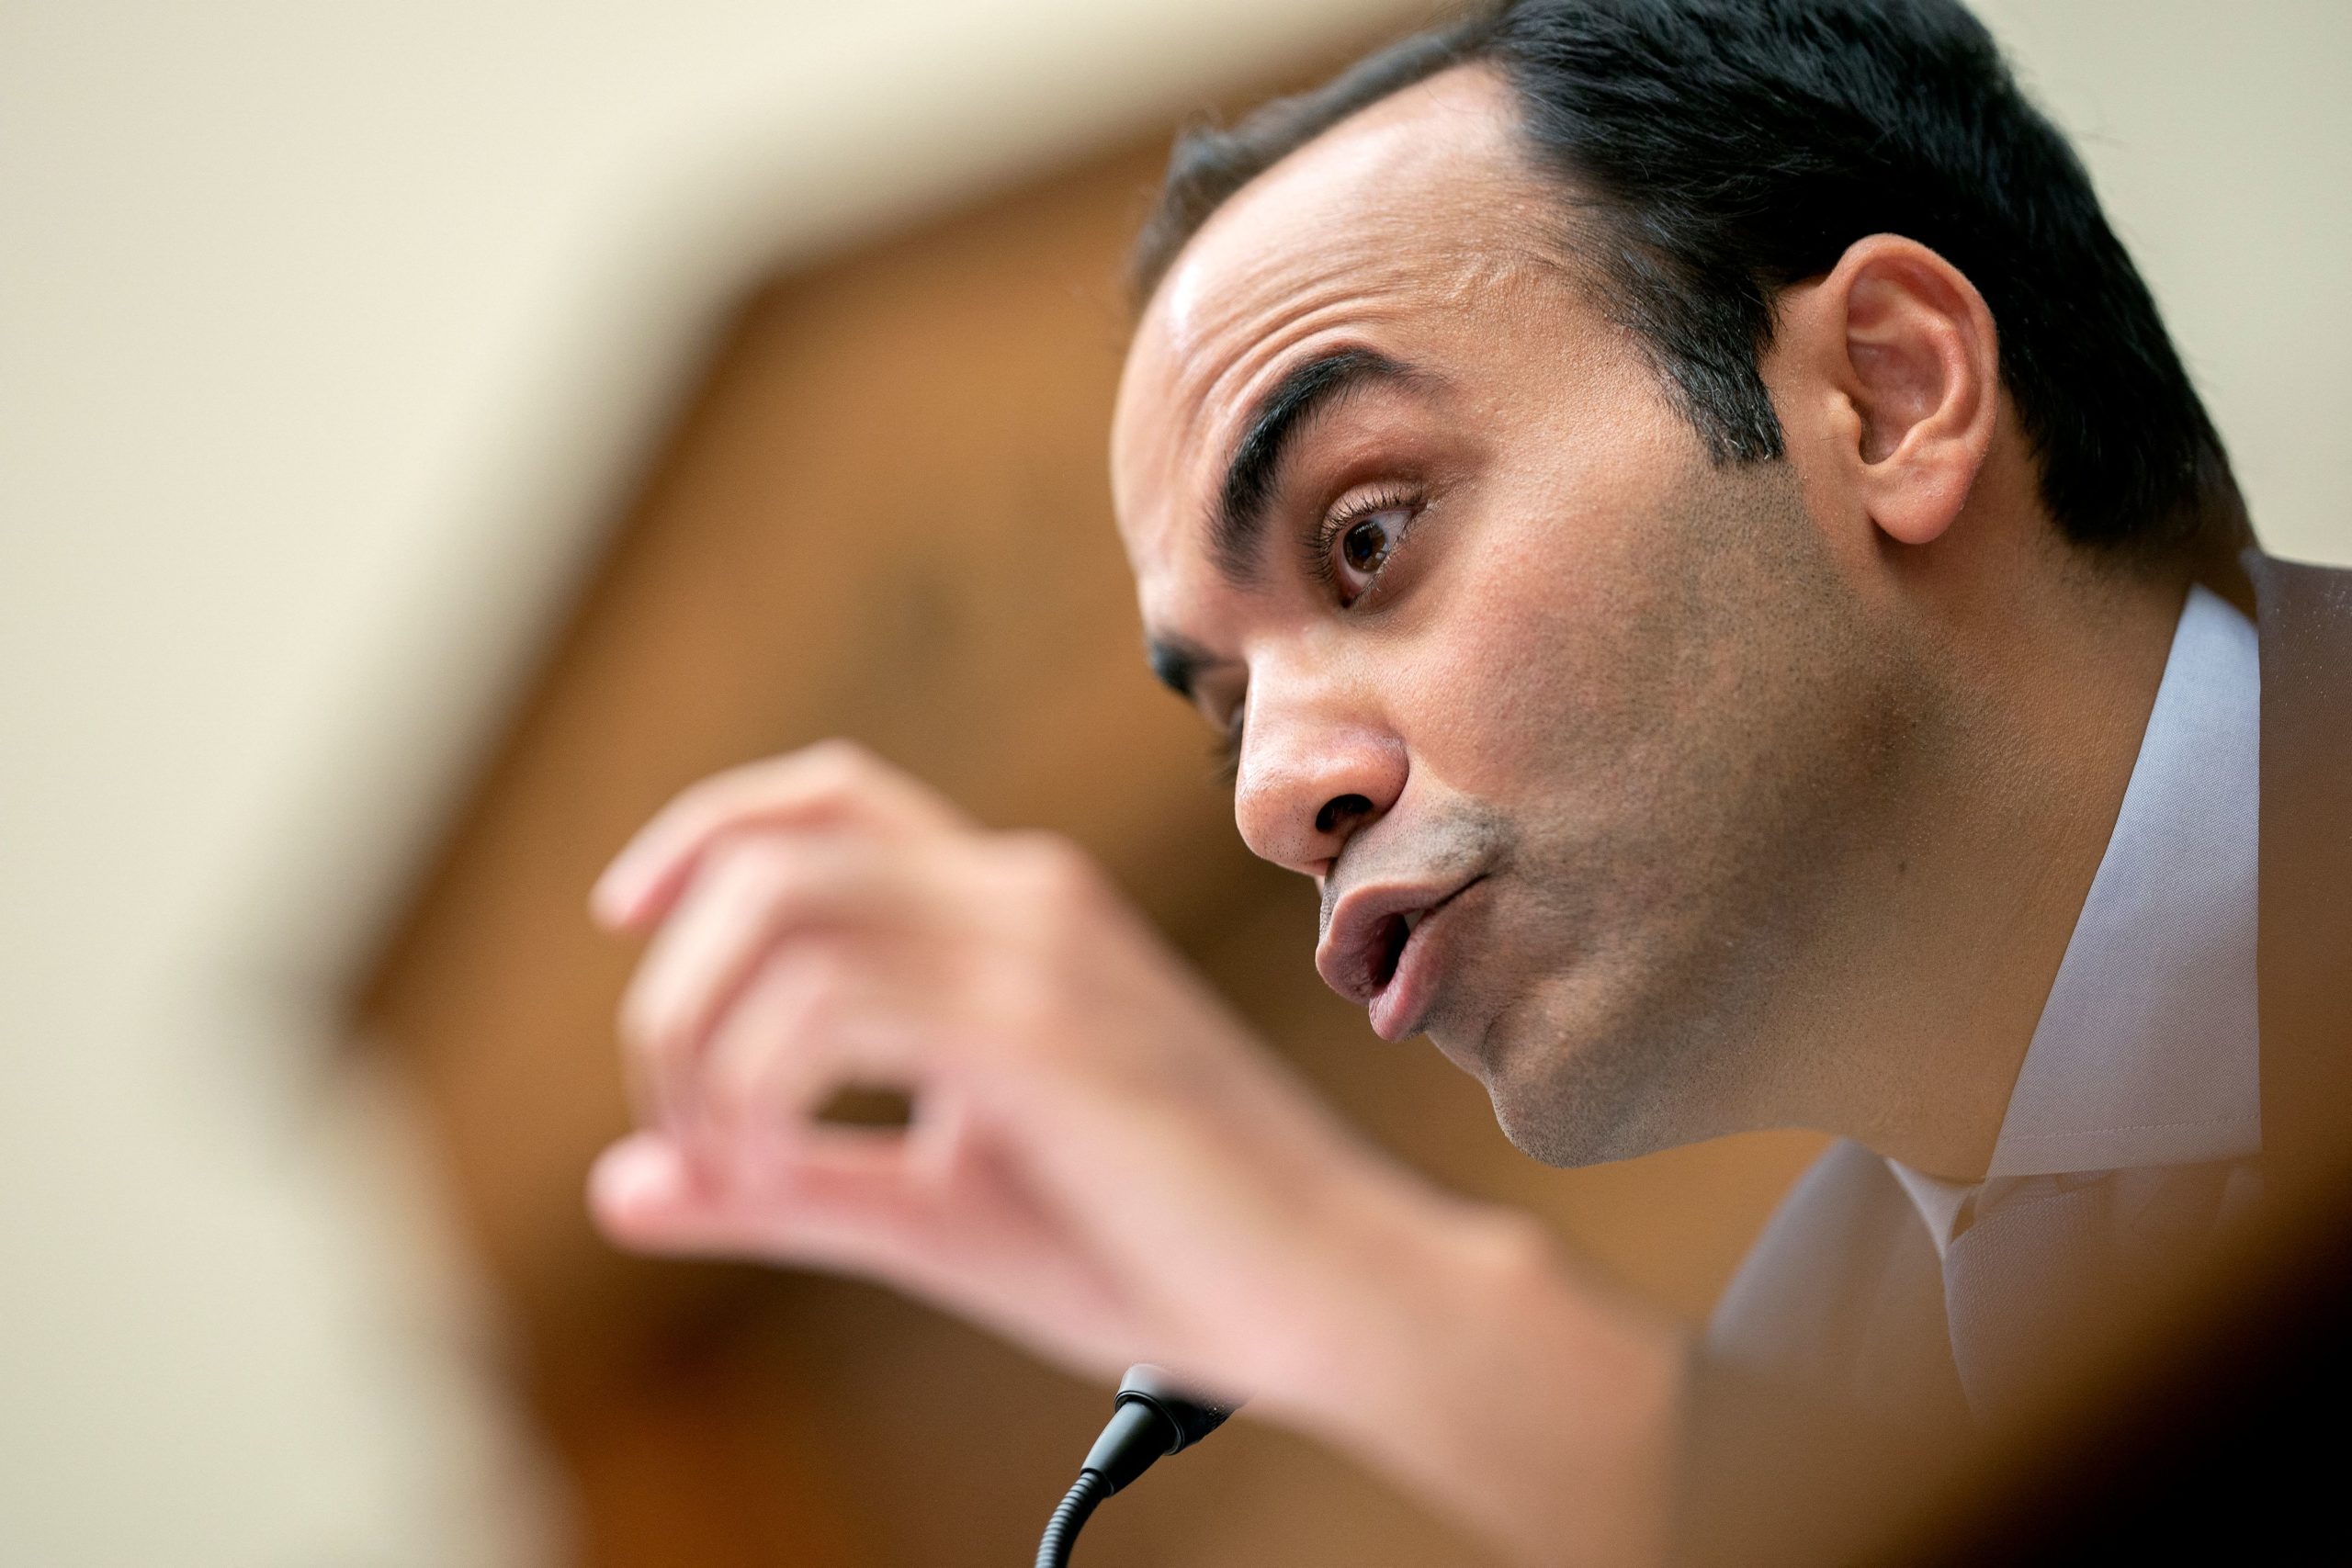 Rohit Chopra, Director of the Consumer Financial Protection Bureau, testifies before the House Committee on Financial Services on Capitol Hill in Washington, DC, on April 27, 2022. (Photo by Stefani Reynolds / AFP) (Photo by STEFANI REYNOLDS/AFP via Getty Images)